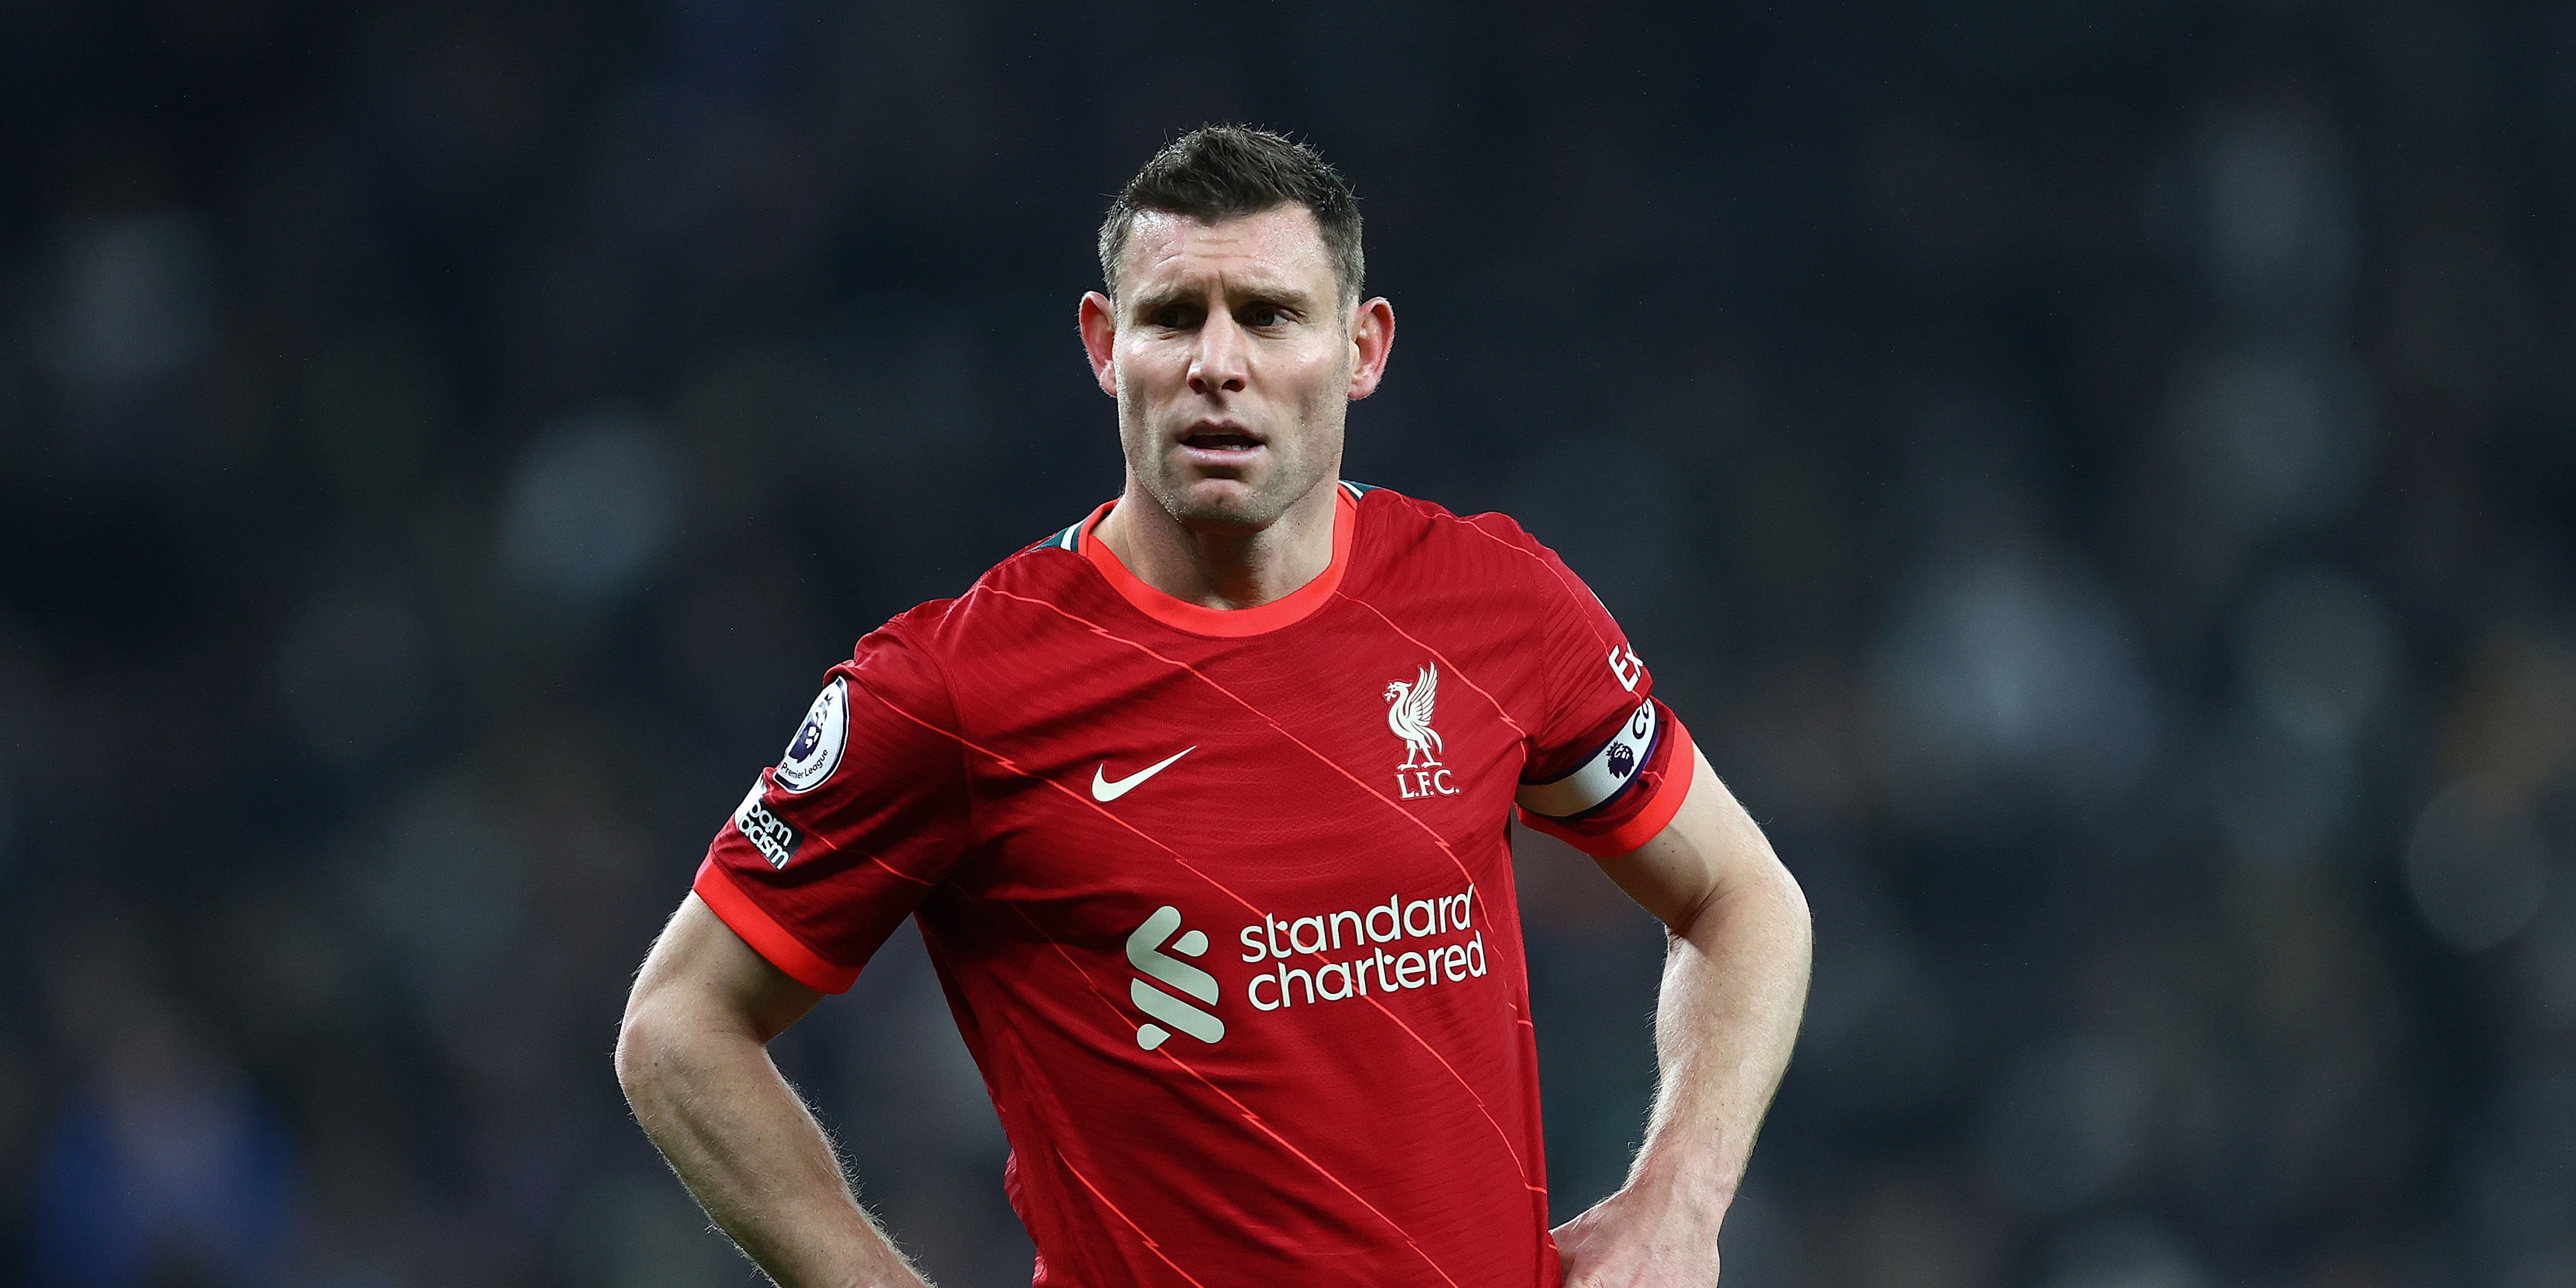 James Milner weighs in on making 200 Premier League appearances for Liverpool and still having ‘more to give’